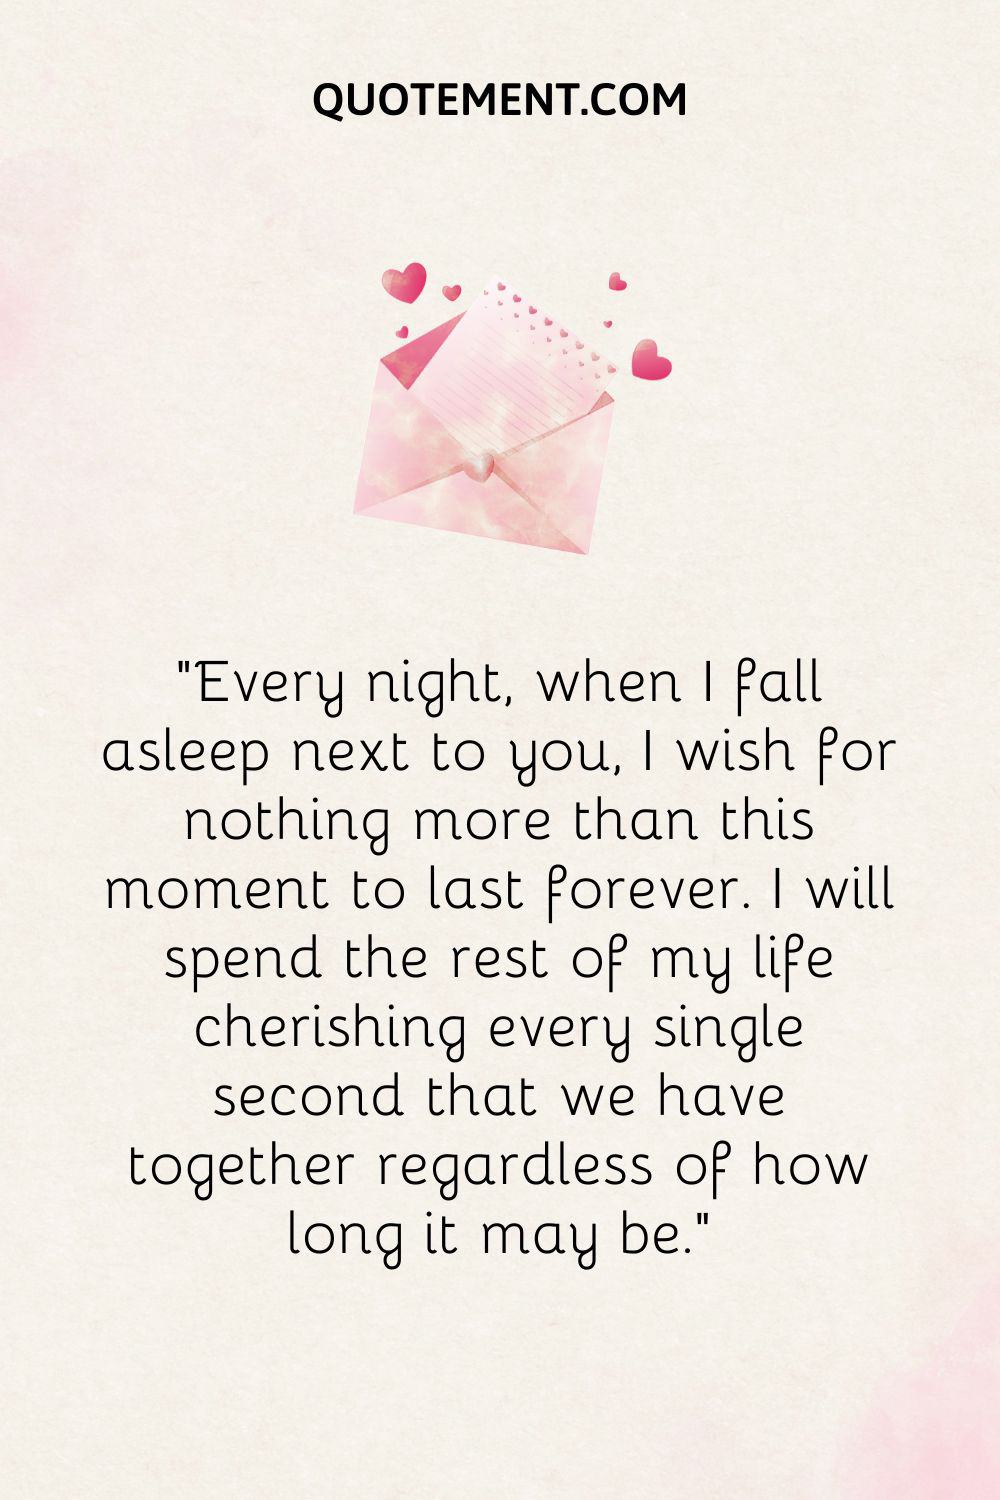 “Every night, when I fall asleep next to you, I wish for nothing more than this moment to last forever.